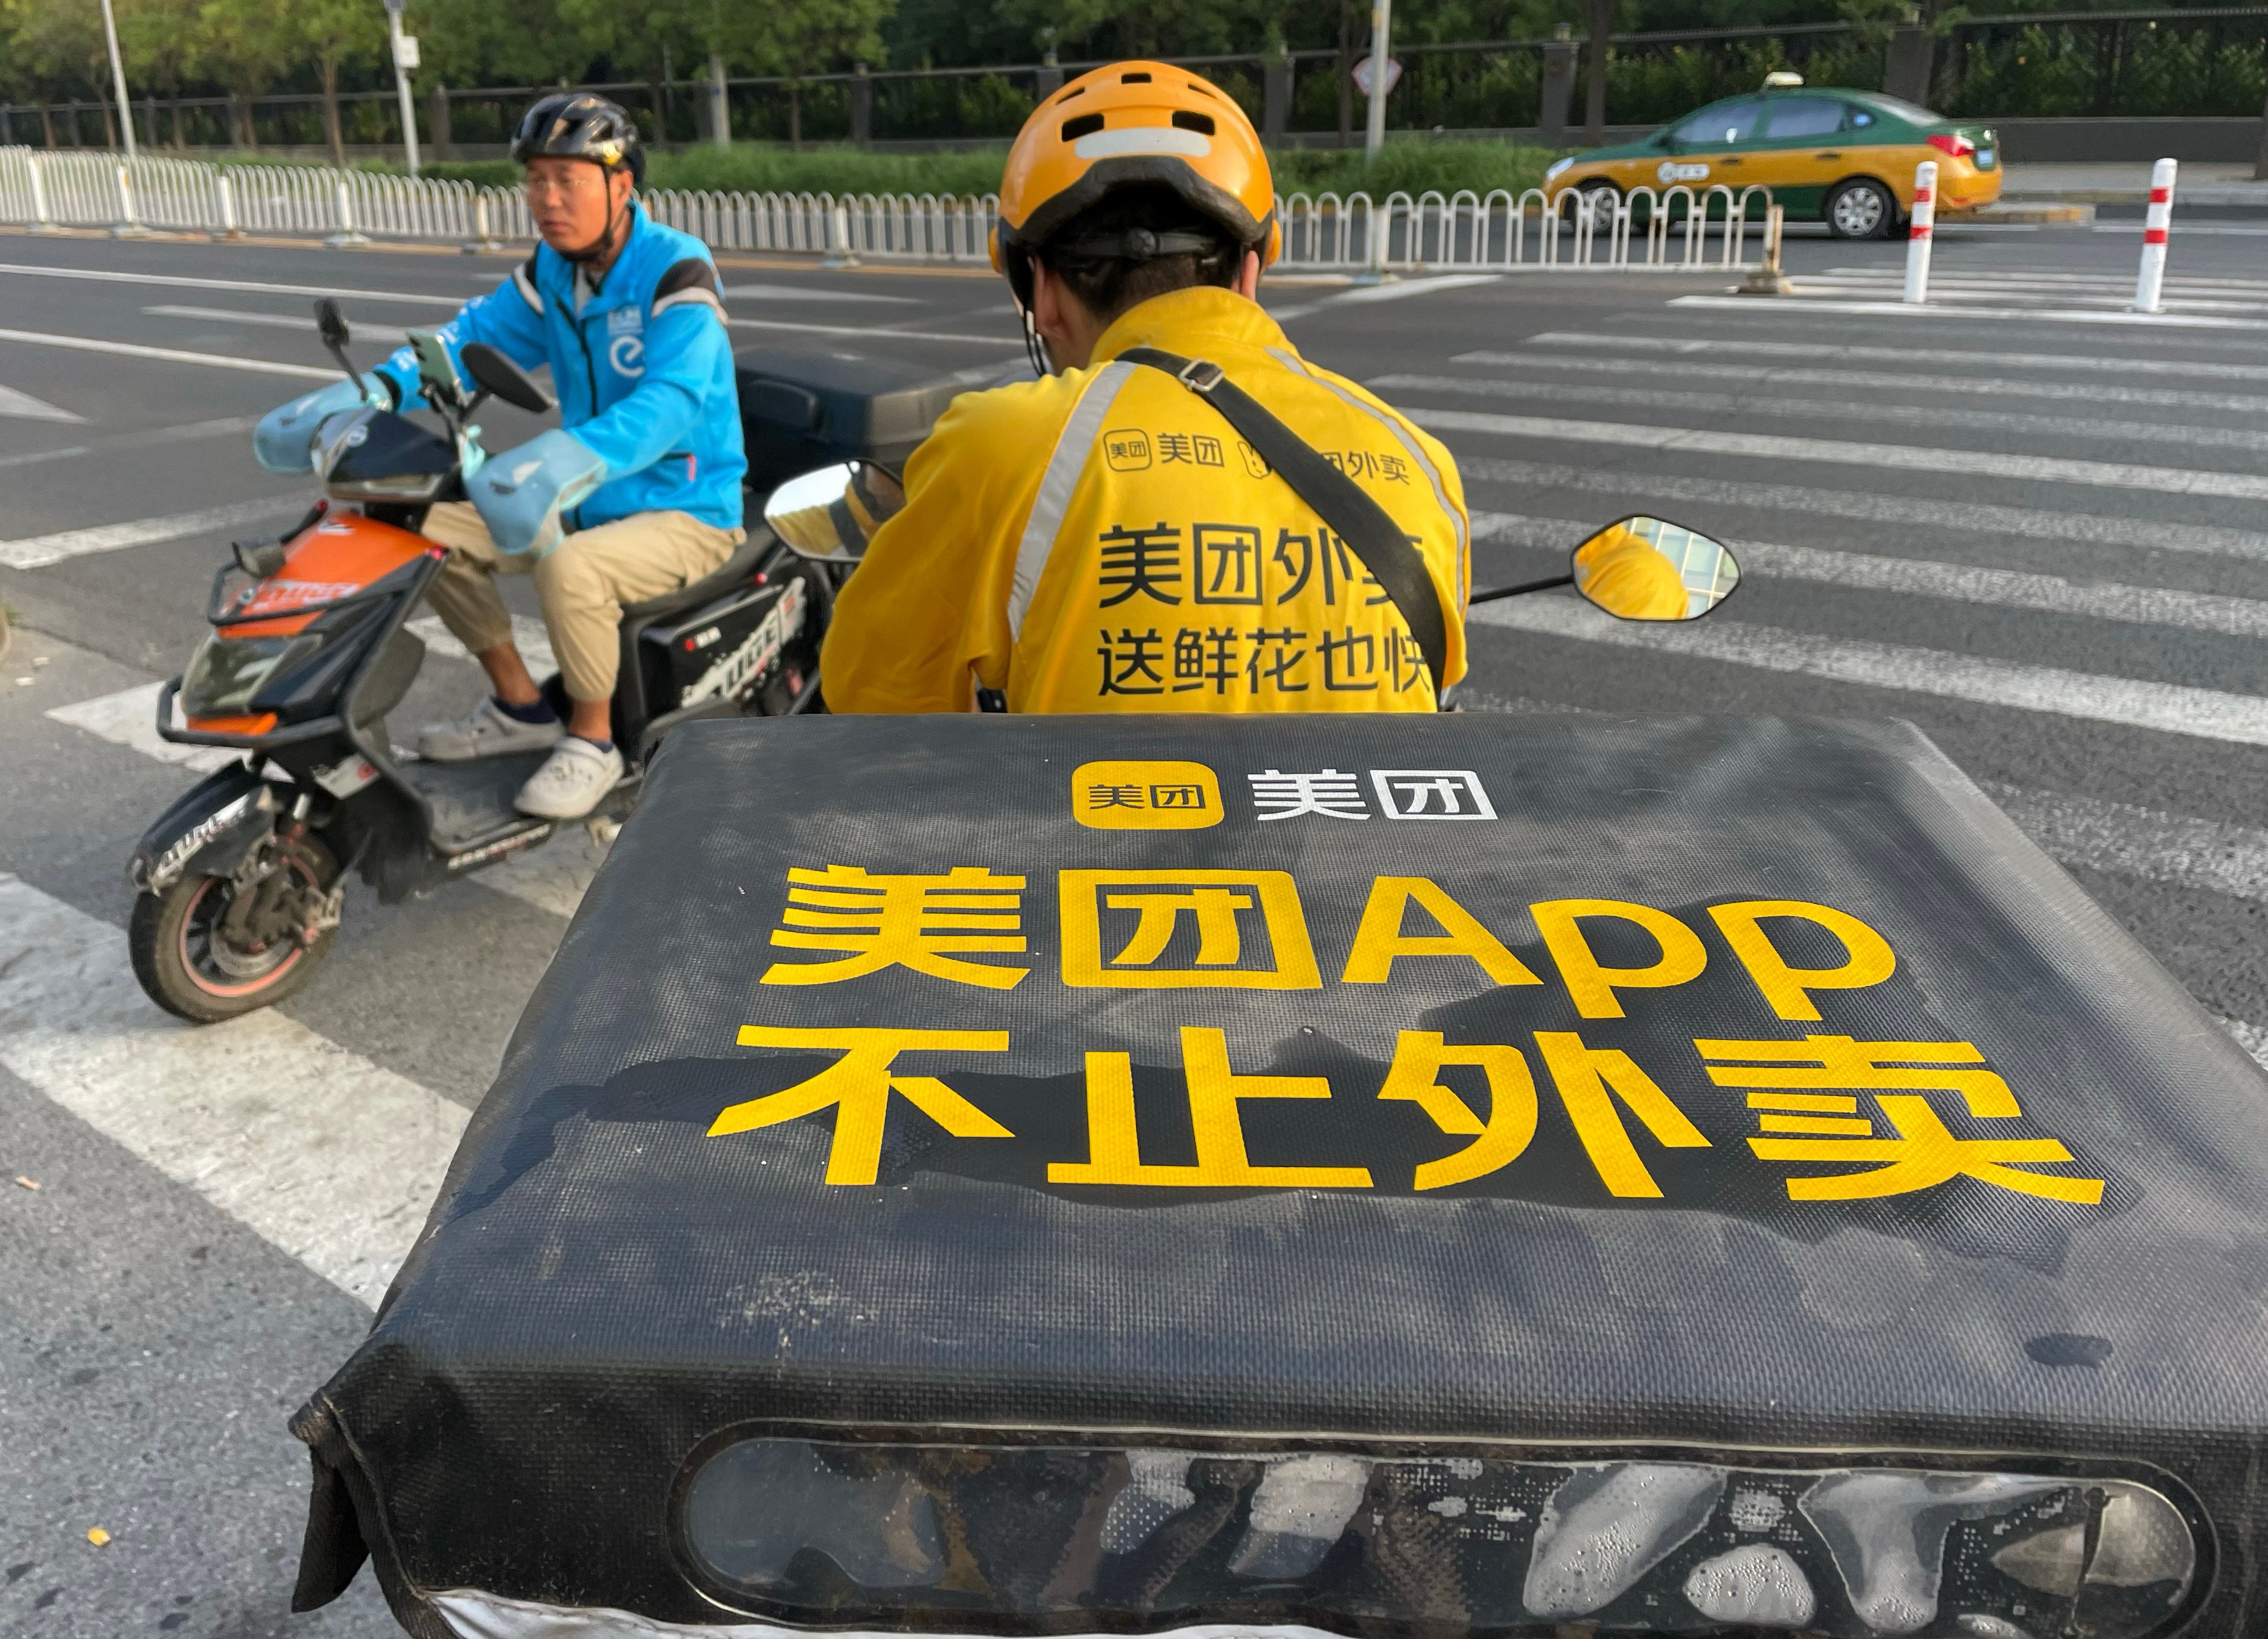 Move may soften the image of Chinese Big Tech firms, which have been trying to shrug off negative portrayals of a 996 work culture. Photo: SCMP/Simon Song